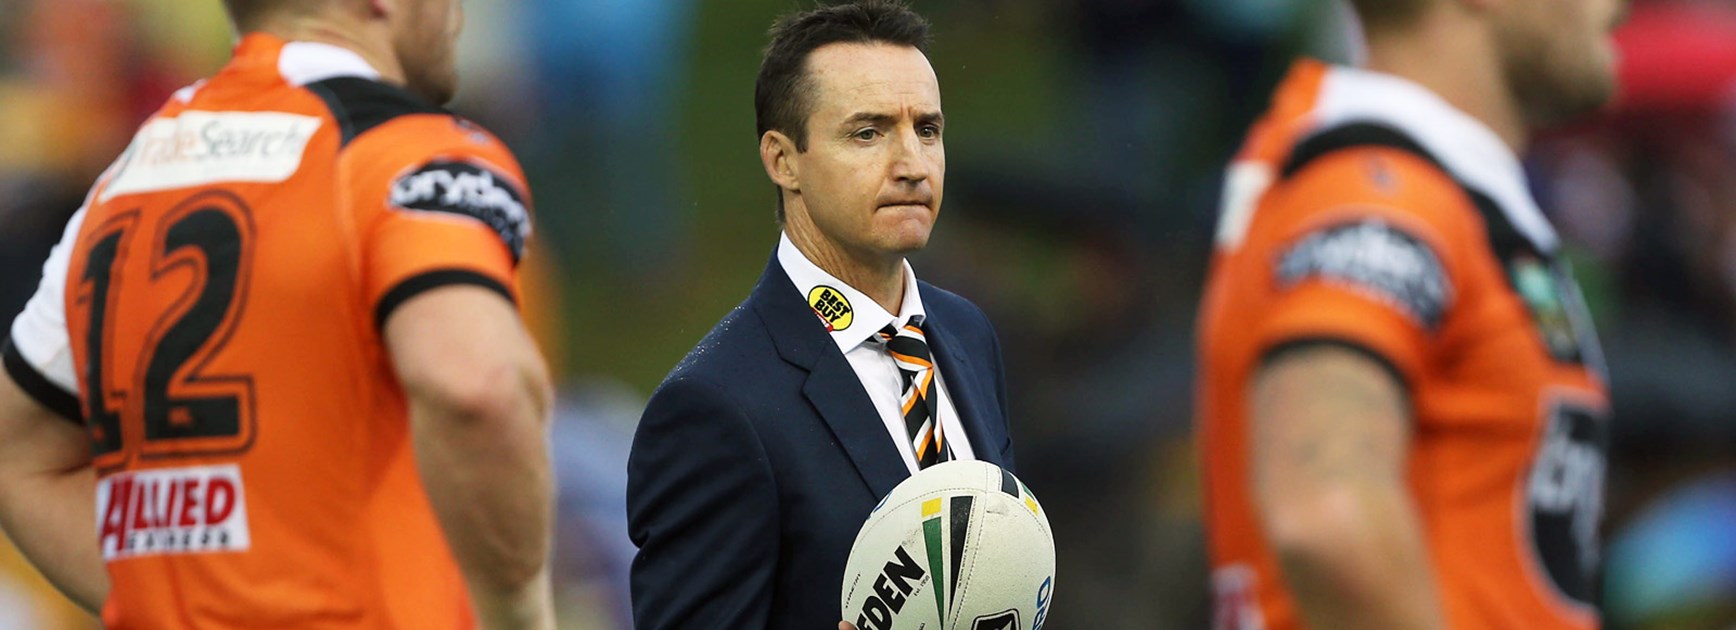 Wests Tigers coach Jason Taylor at Leichhardt Oval.